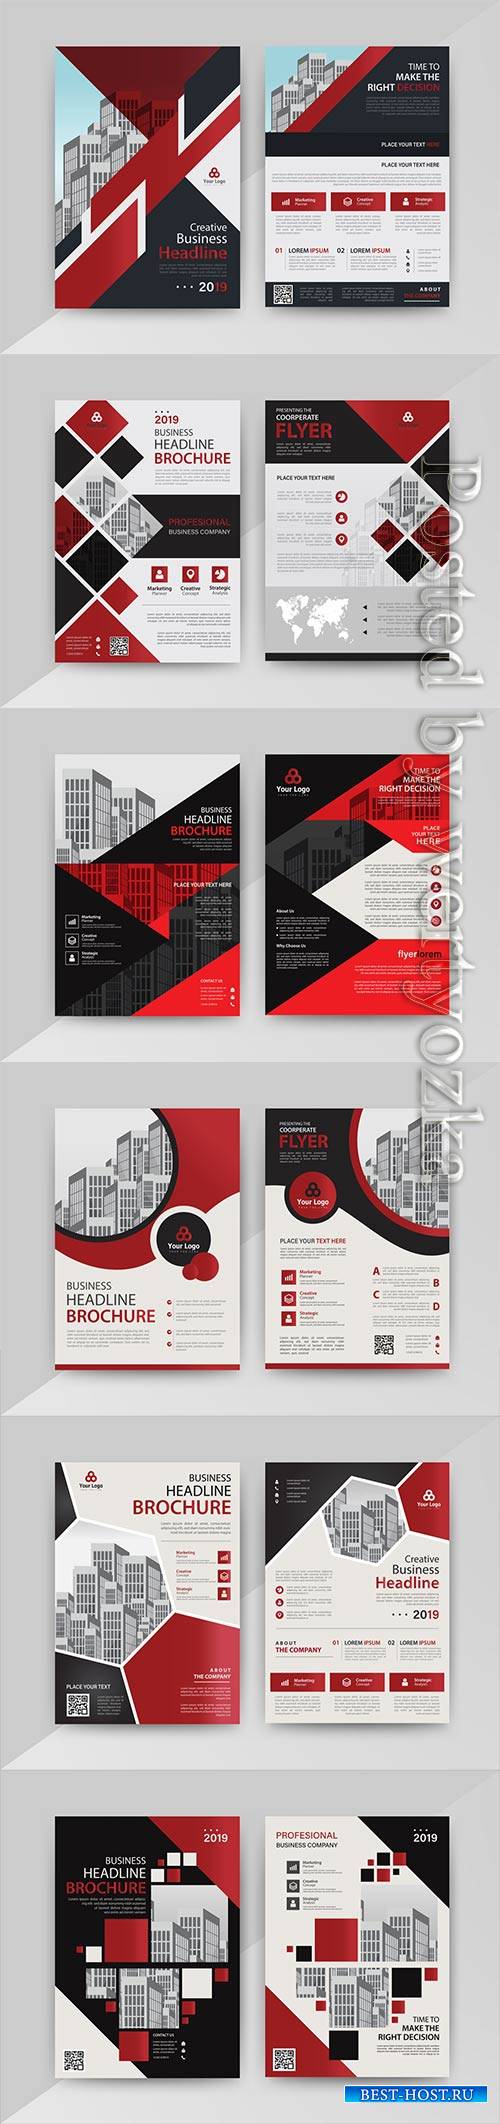 Business vector template for brochure, annual report, magazine # 24